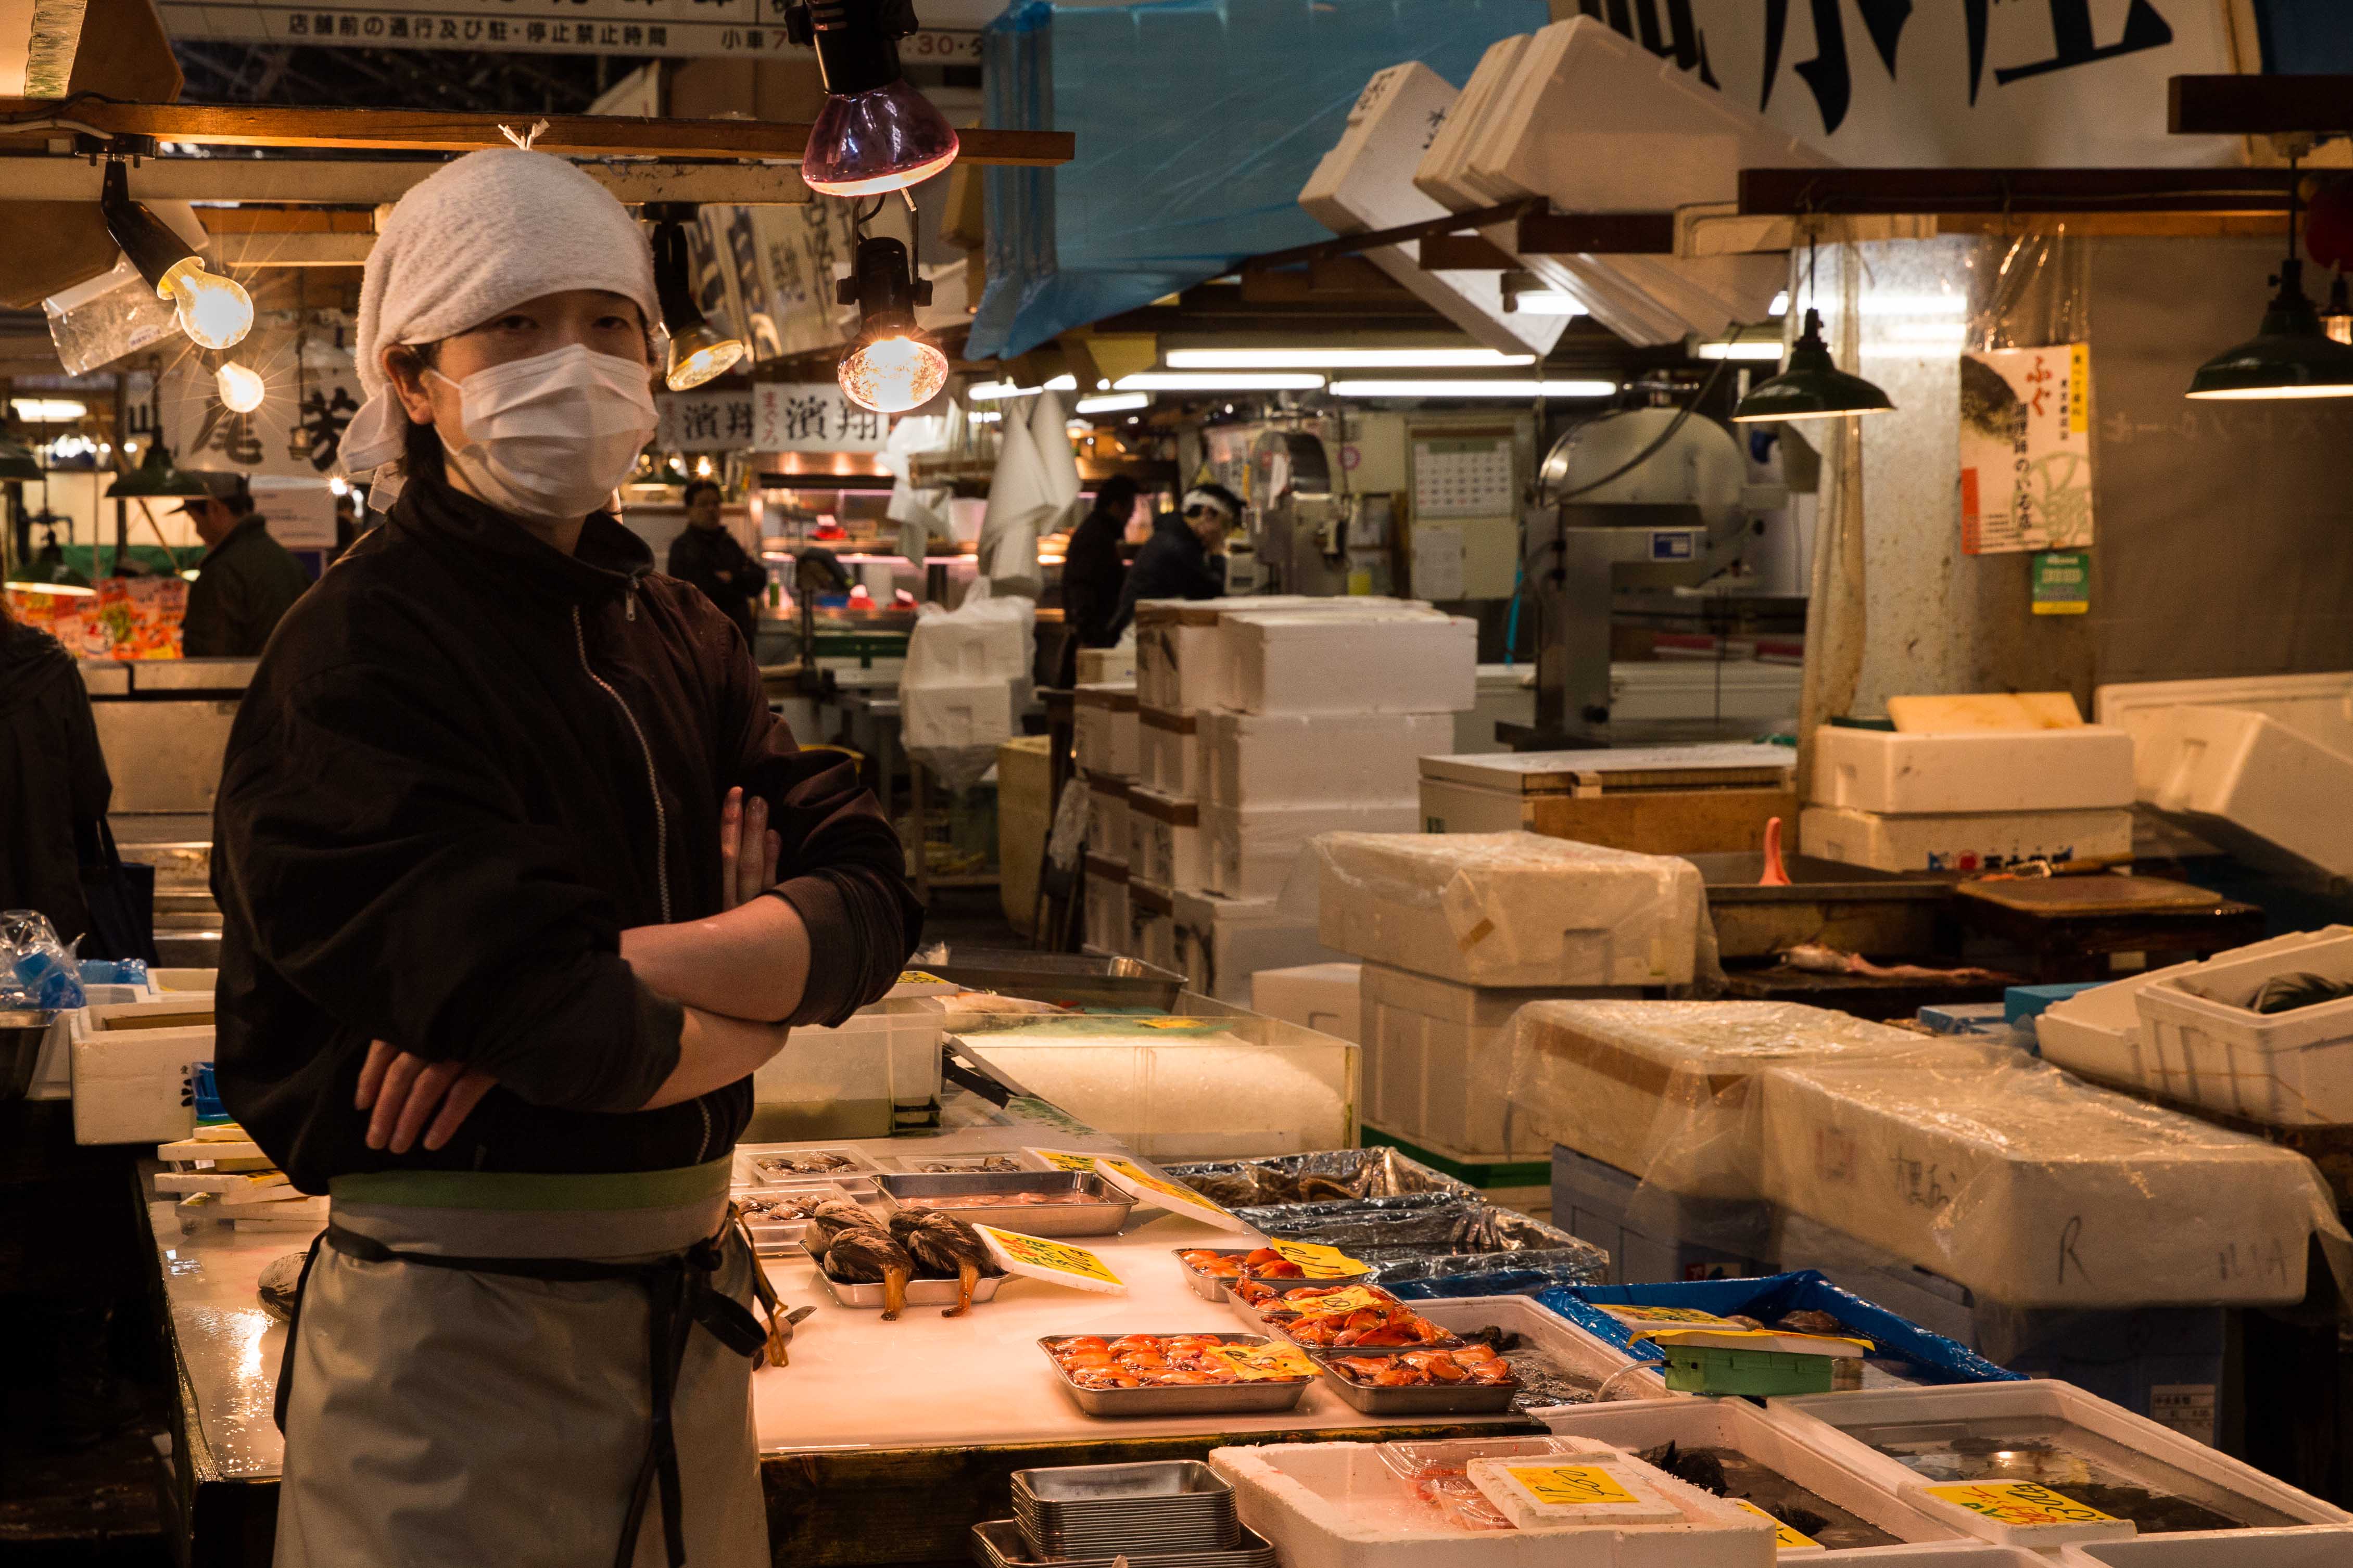 Standing proud in the biggest wholesale fish and seafood market in the world, The Handler is ready to serve customers. More than 700,000 metric tons of seafood are handled every year at the three seafood markets in Tokyo, with a total value in excess of 600 billion yen.